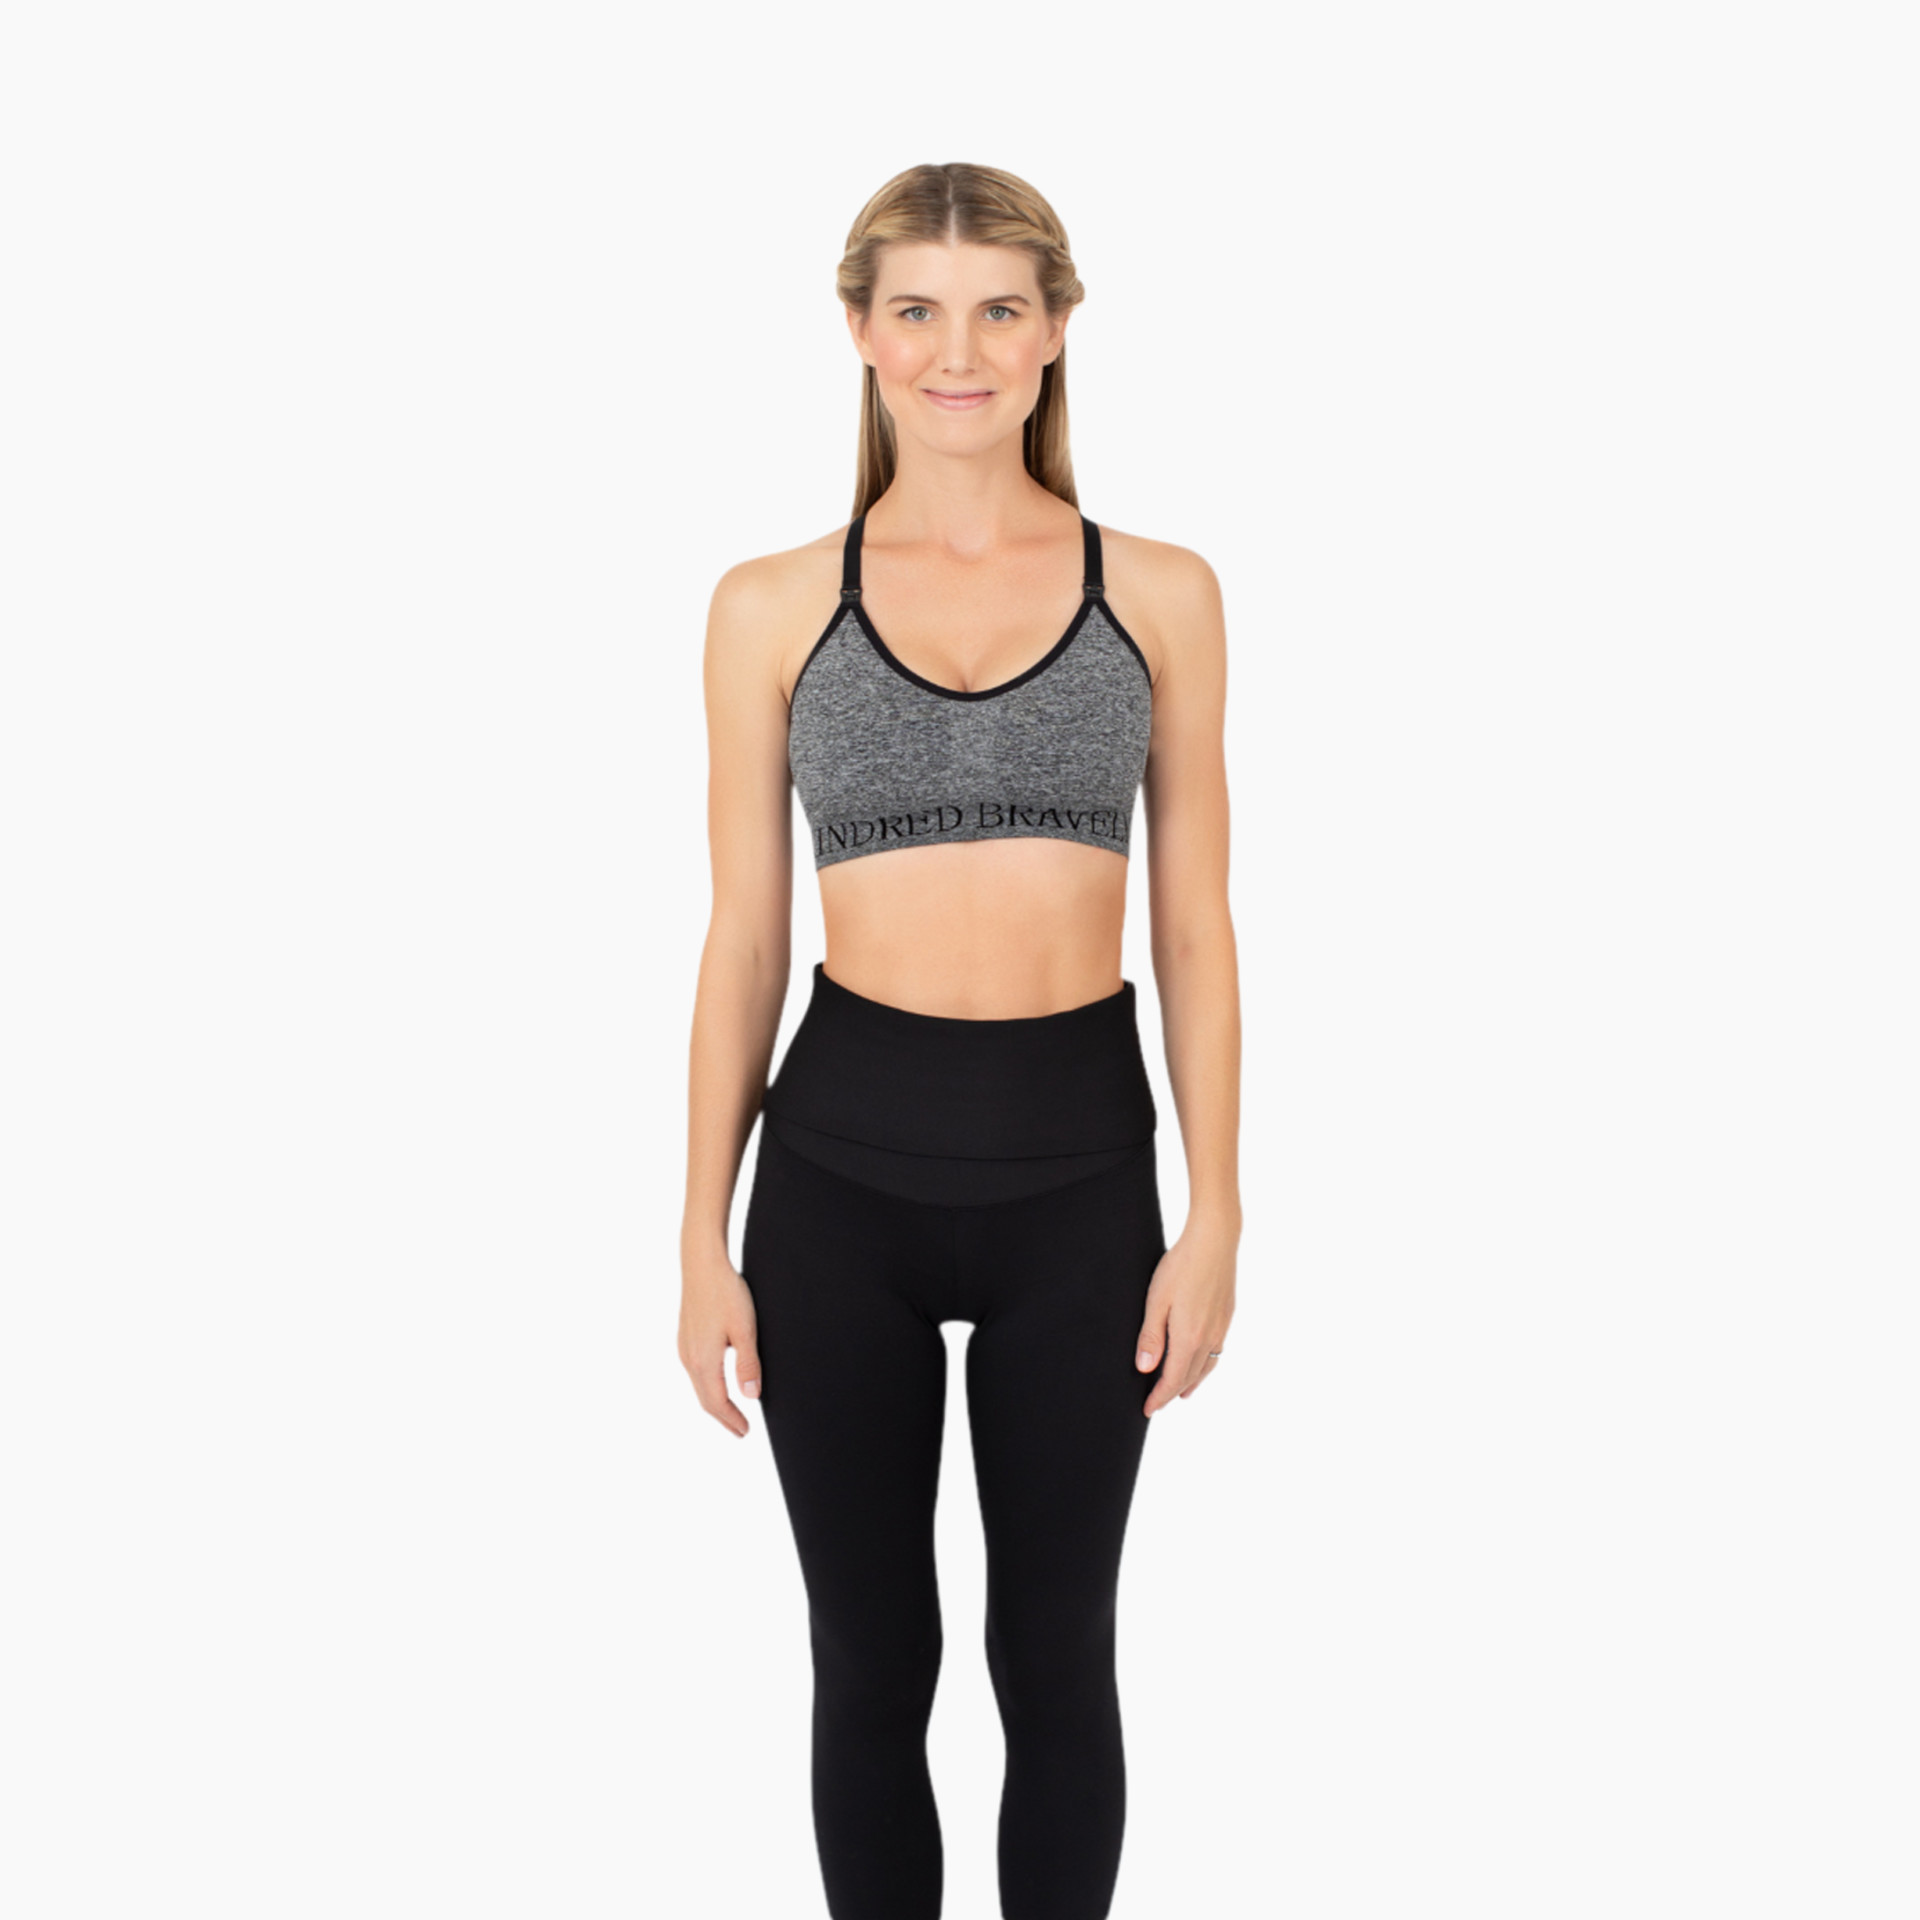 Kindred Bravely Sublime Support Low Impact Nursing & Maternity Sports Bra,  Small 